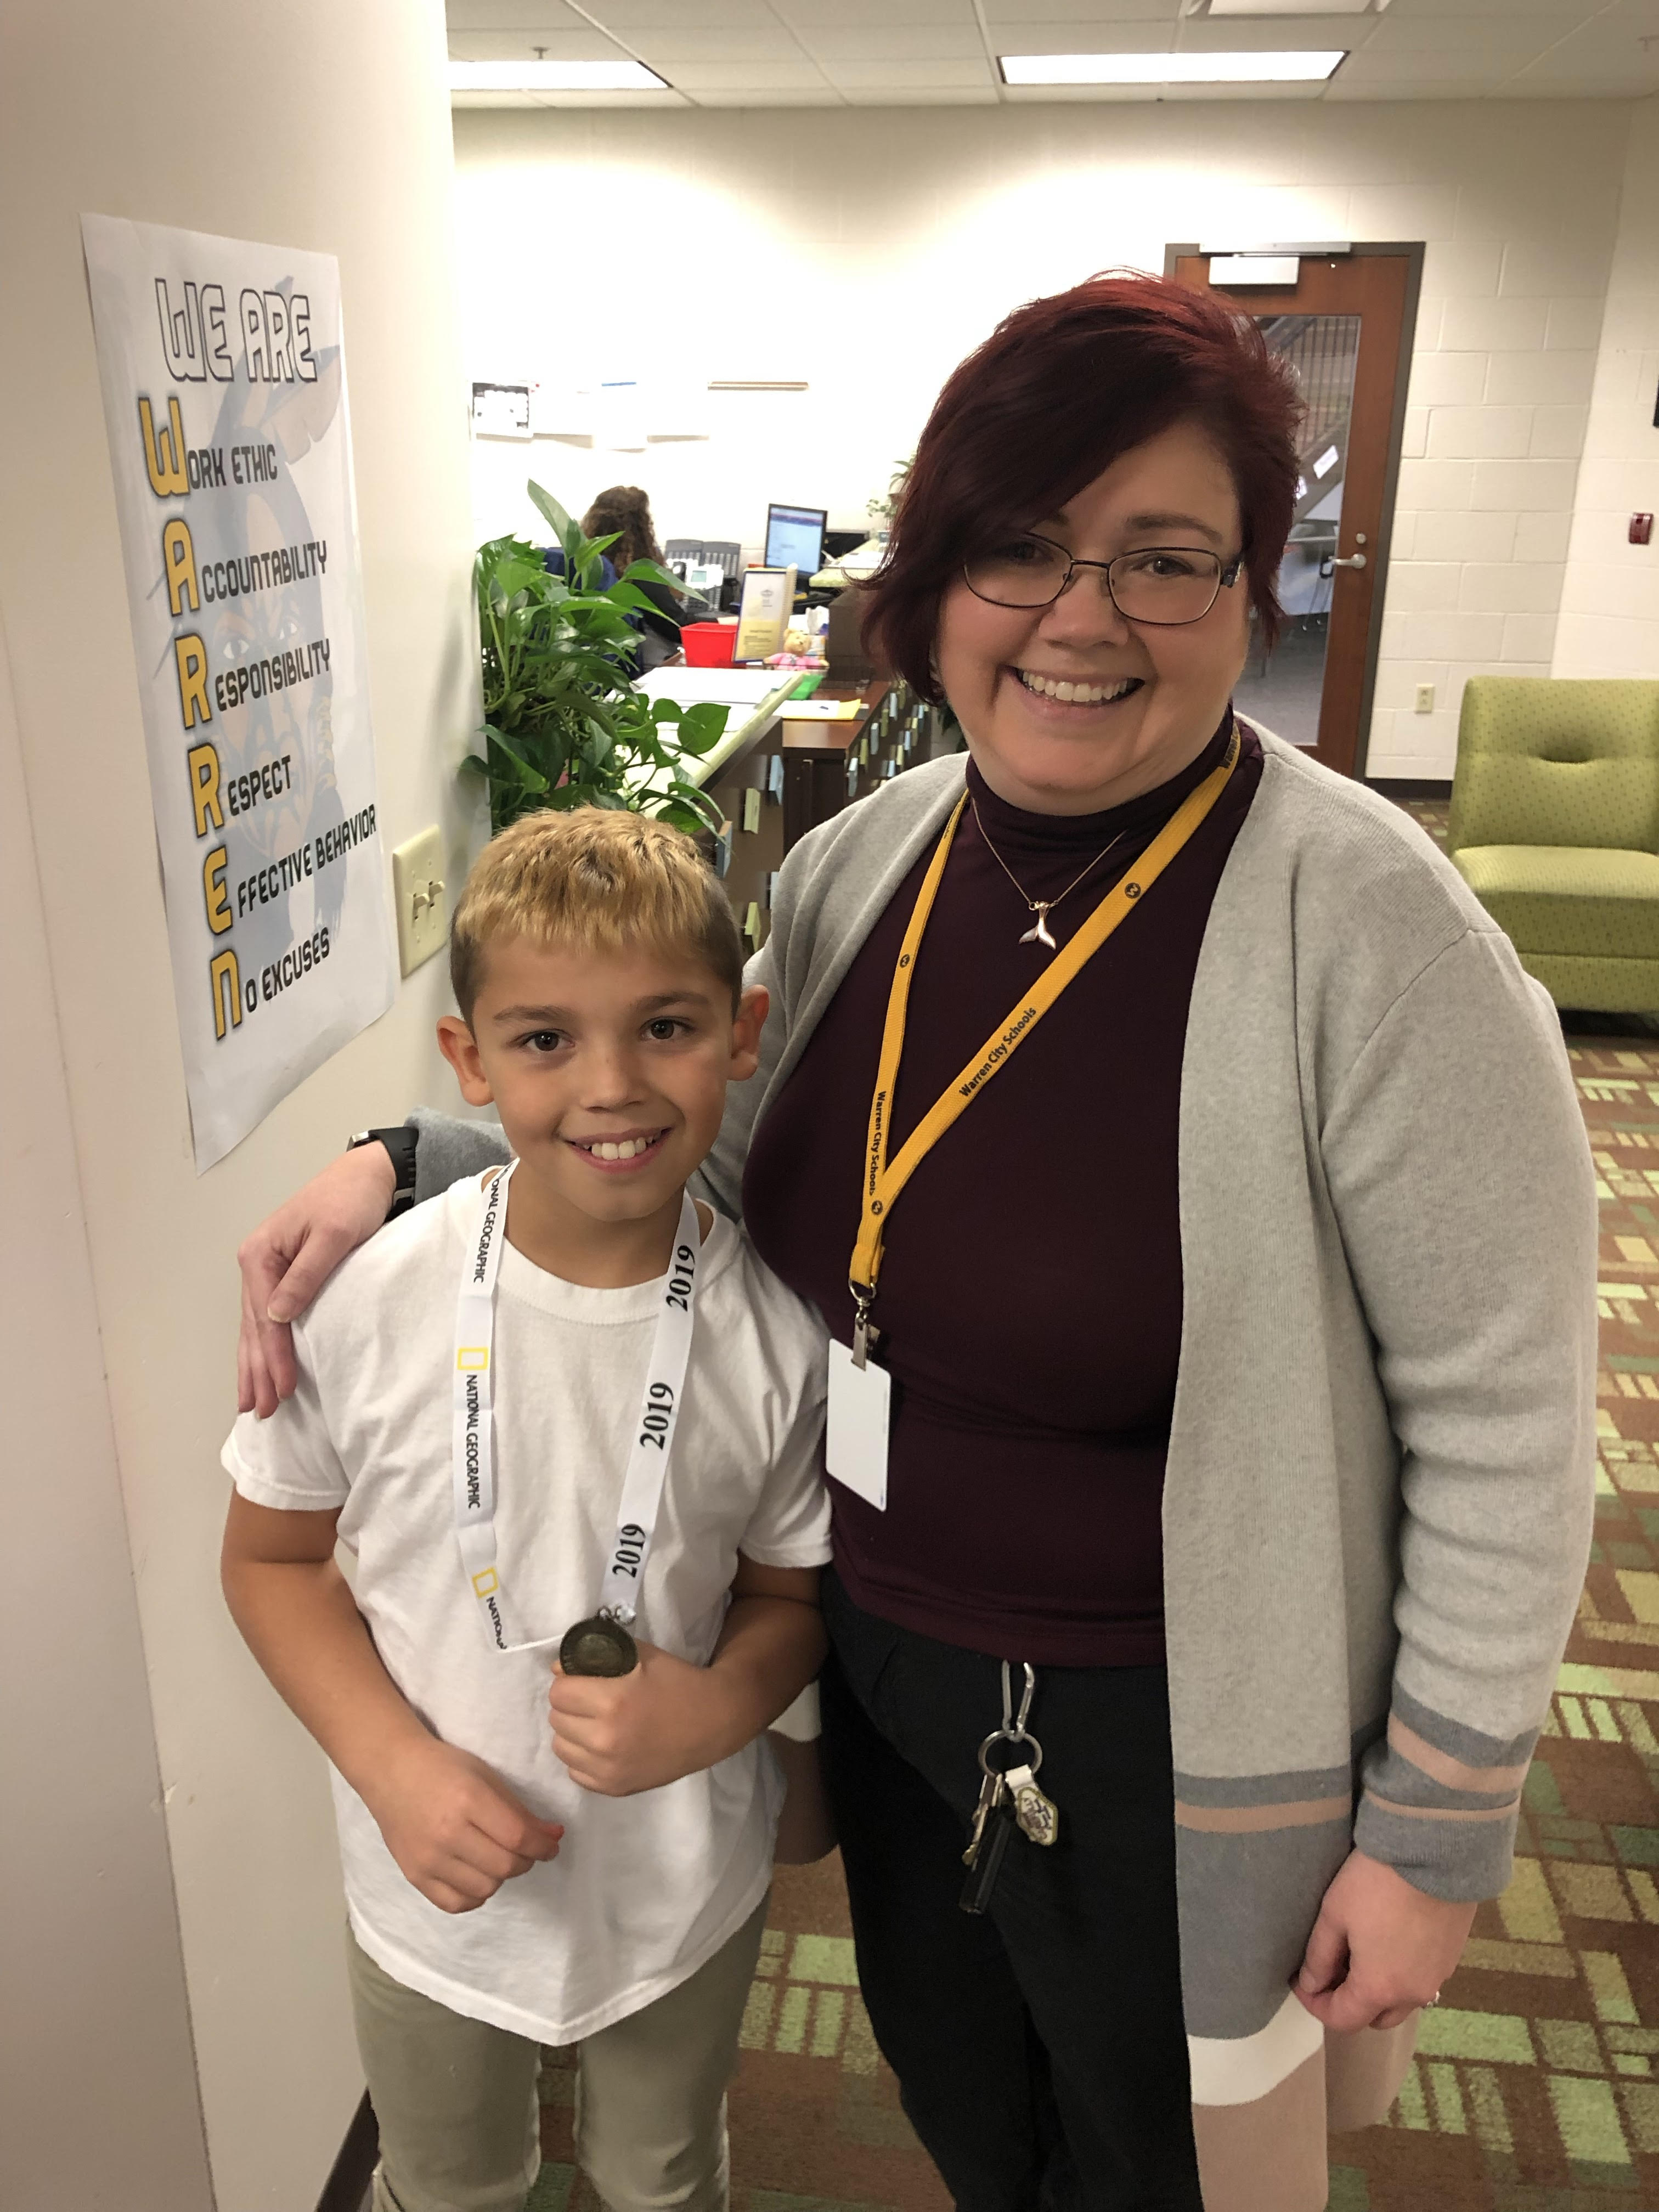 Congratulation to our 2019 Geography Bee Winner